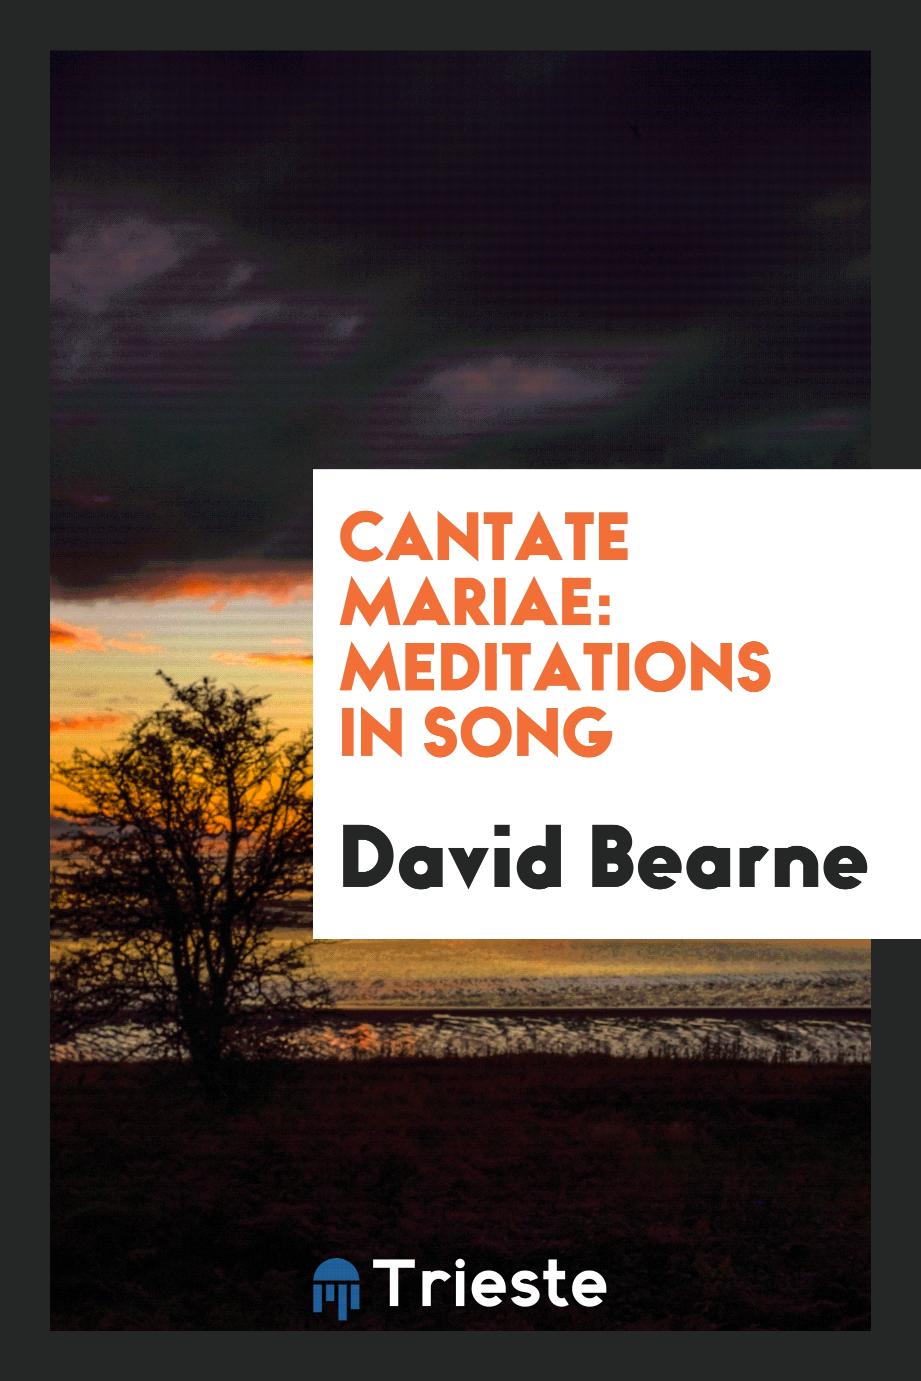 Cantate Mariae: Meditations in Song